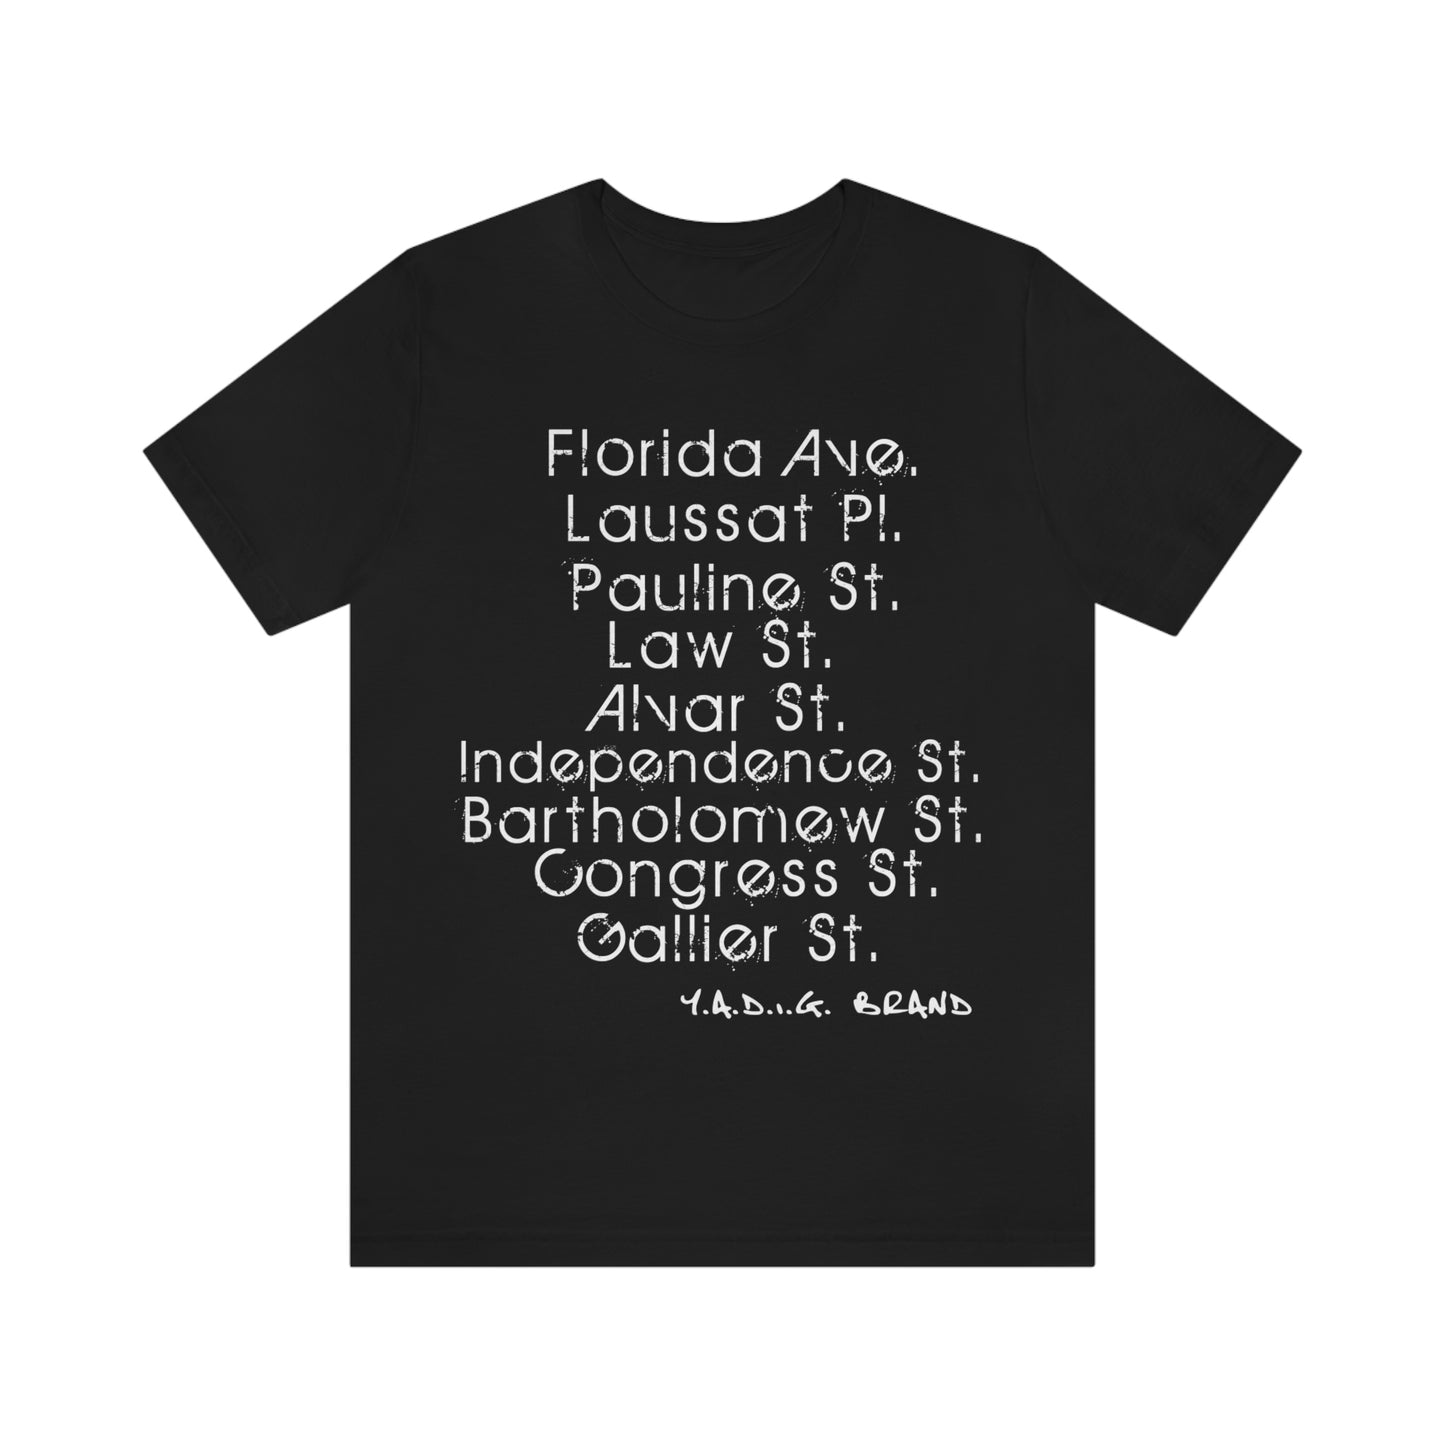 Florida Projects 2nd Edition T-Shirt